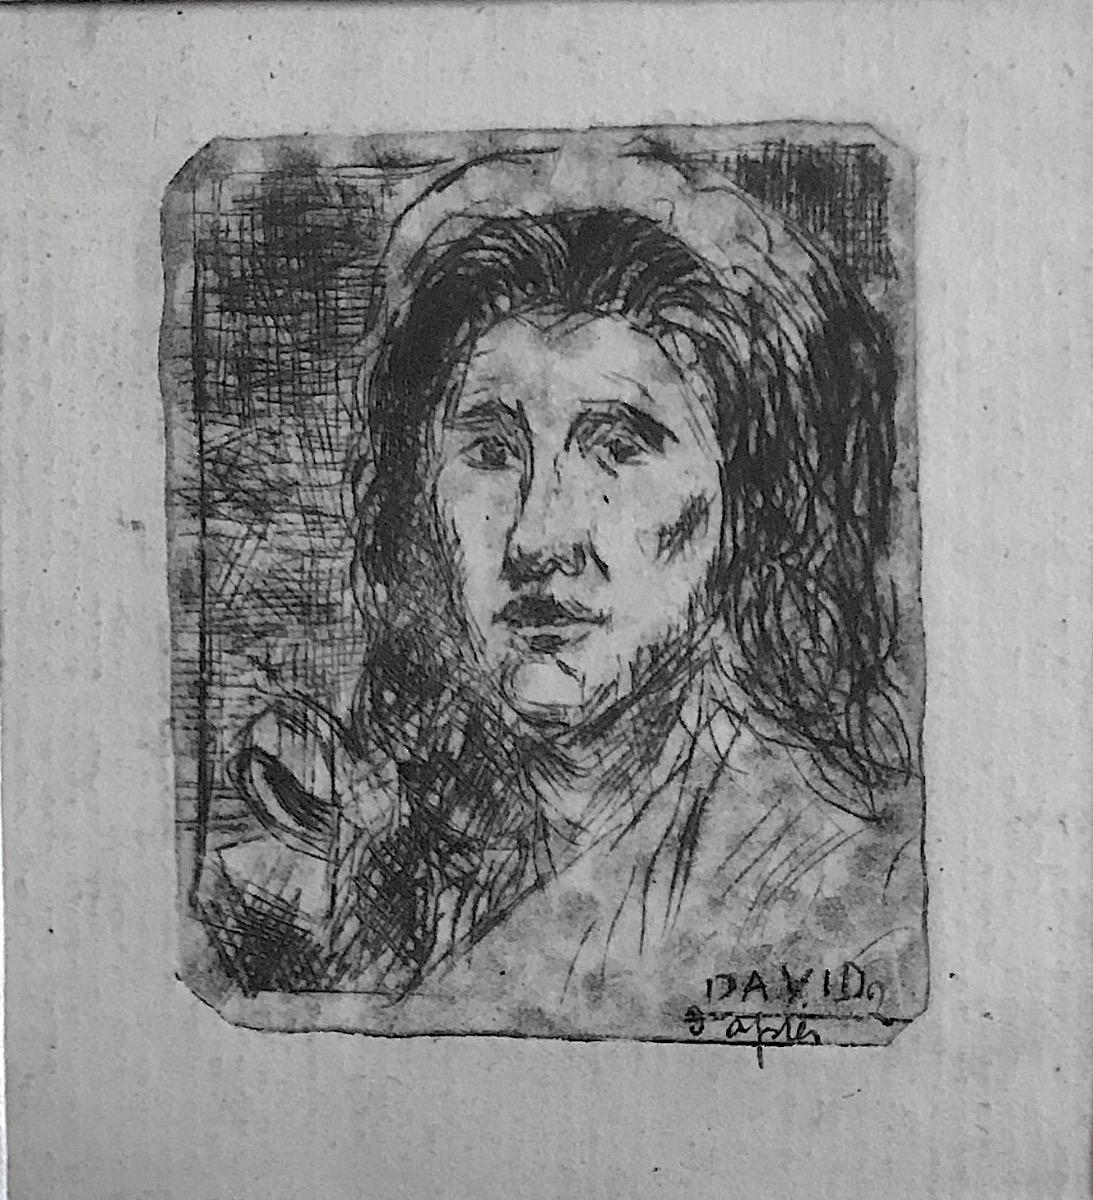 Albert Lepreux Portrait Print - Portrait After David - Etching on Paper by A. Lepreux - Early 20th Century